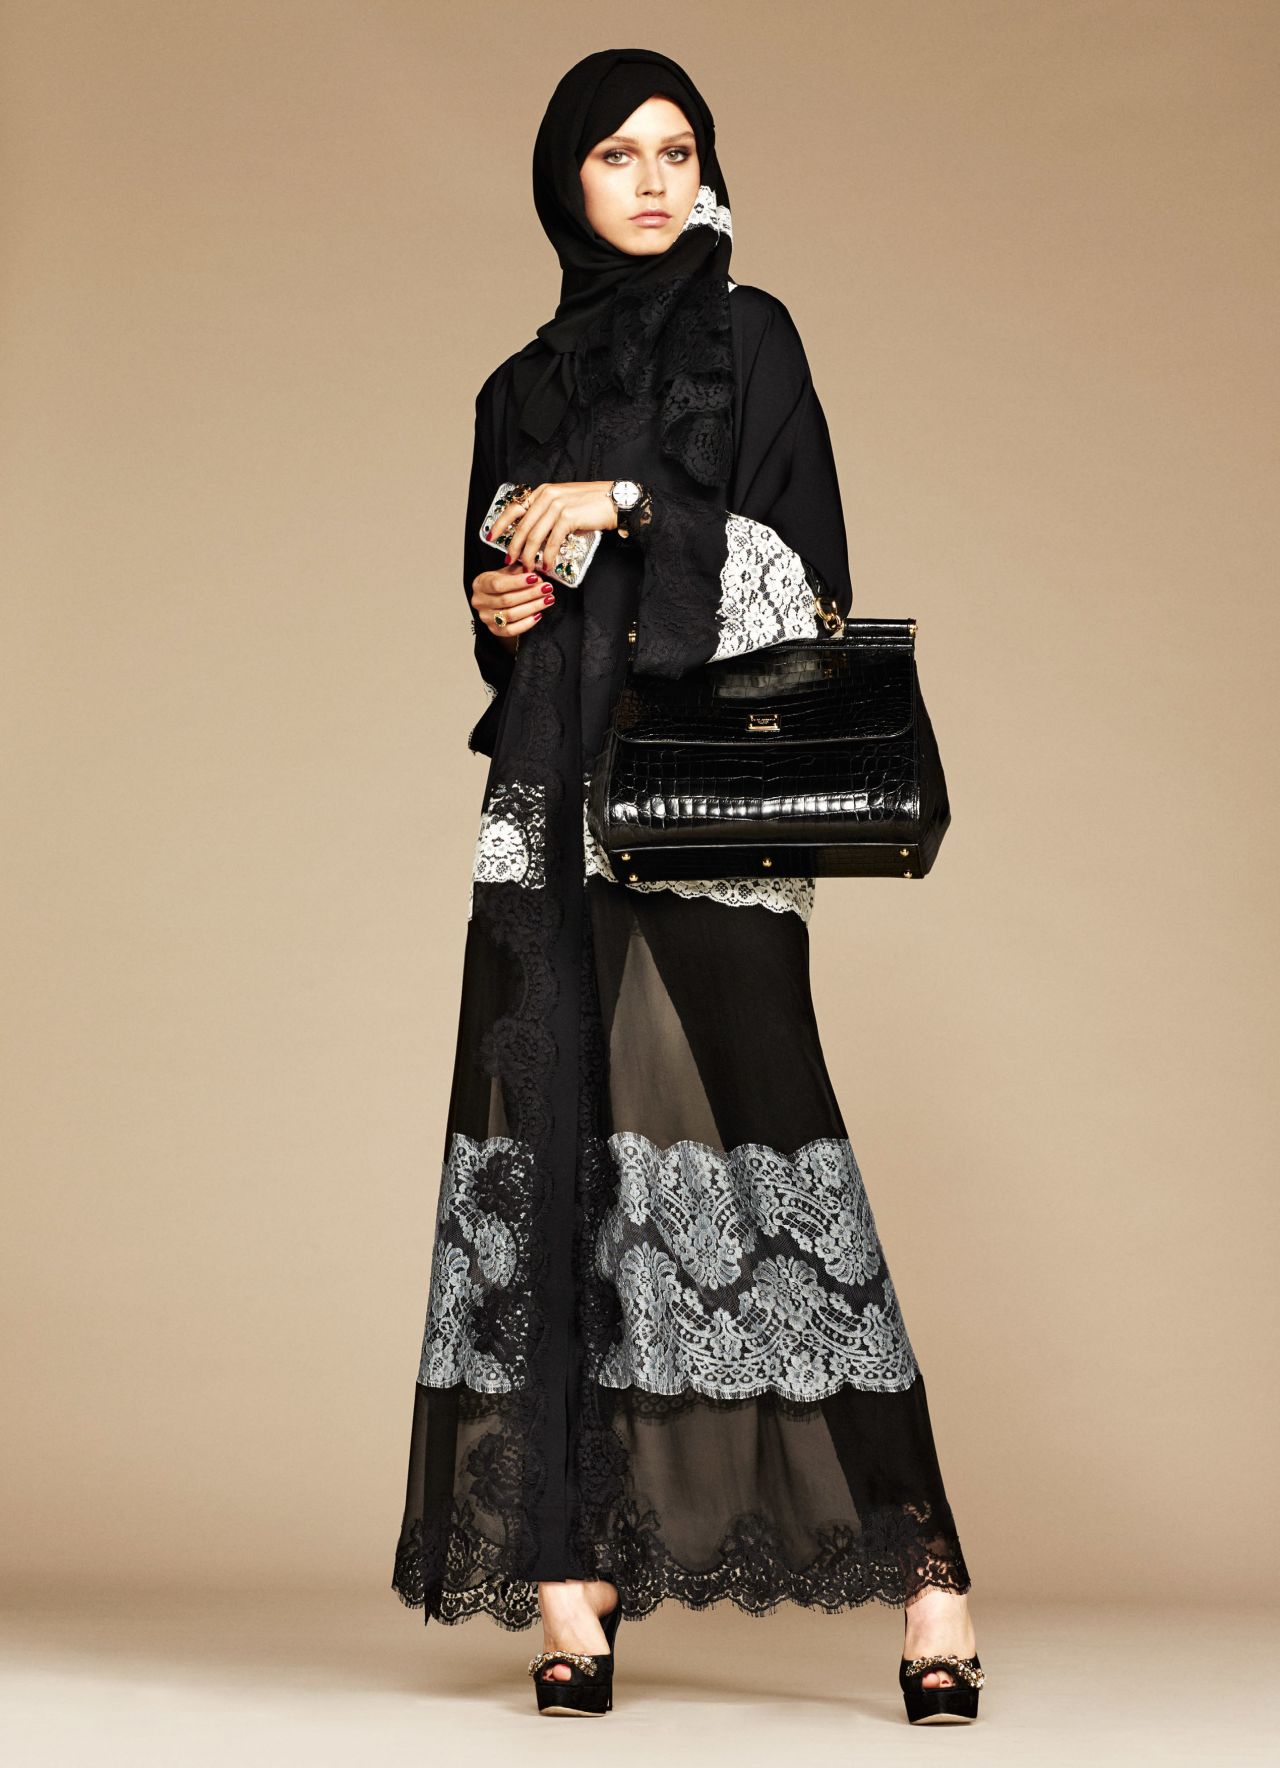 The collection will be available in all of Dolce & Gabbana's Middle East boutiques, and select European stores.